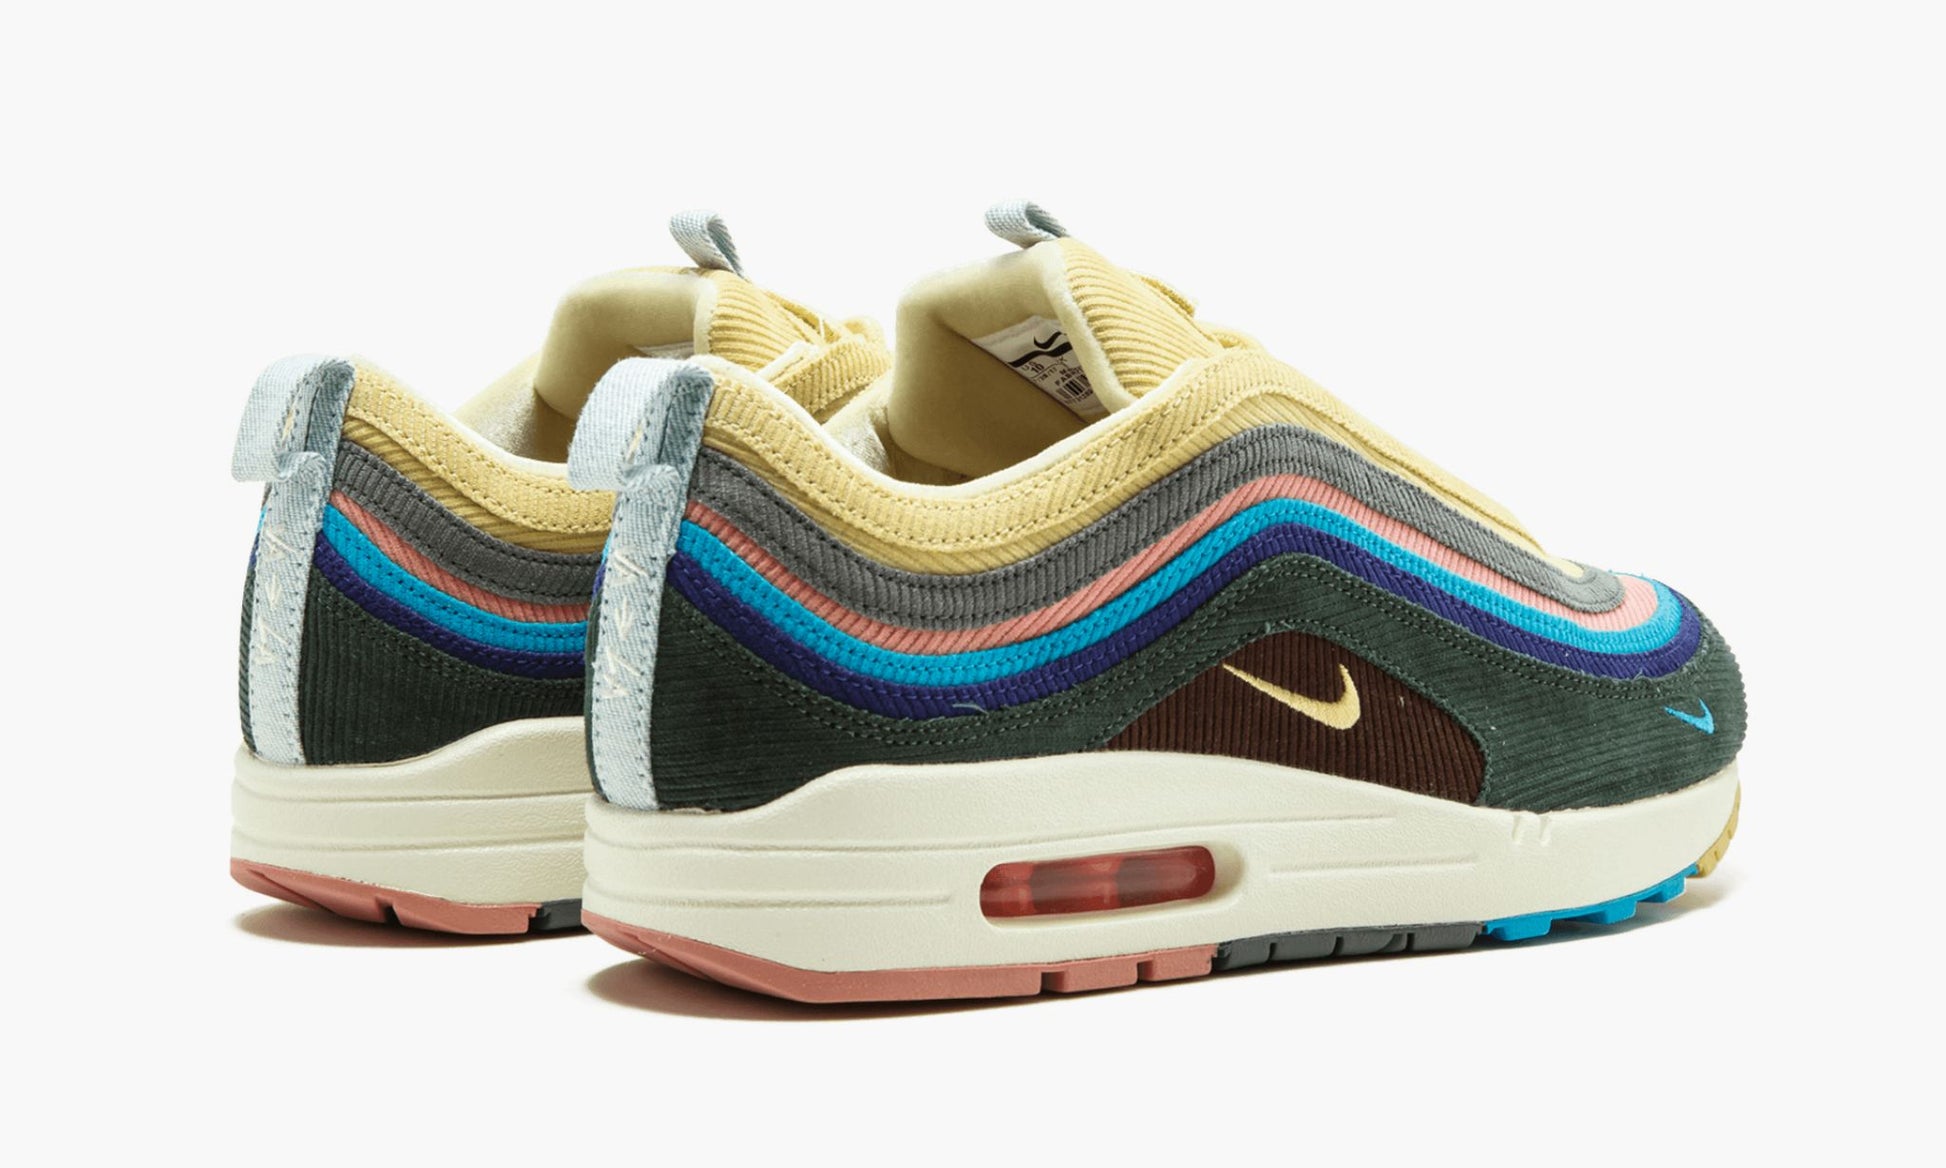 Max 1/97 Sean Wotherspoon (Extra Lace Set Only) AJ4219 400 - Archive Sneakers